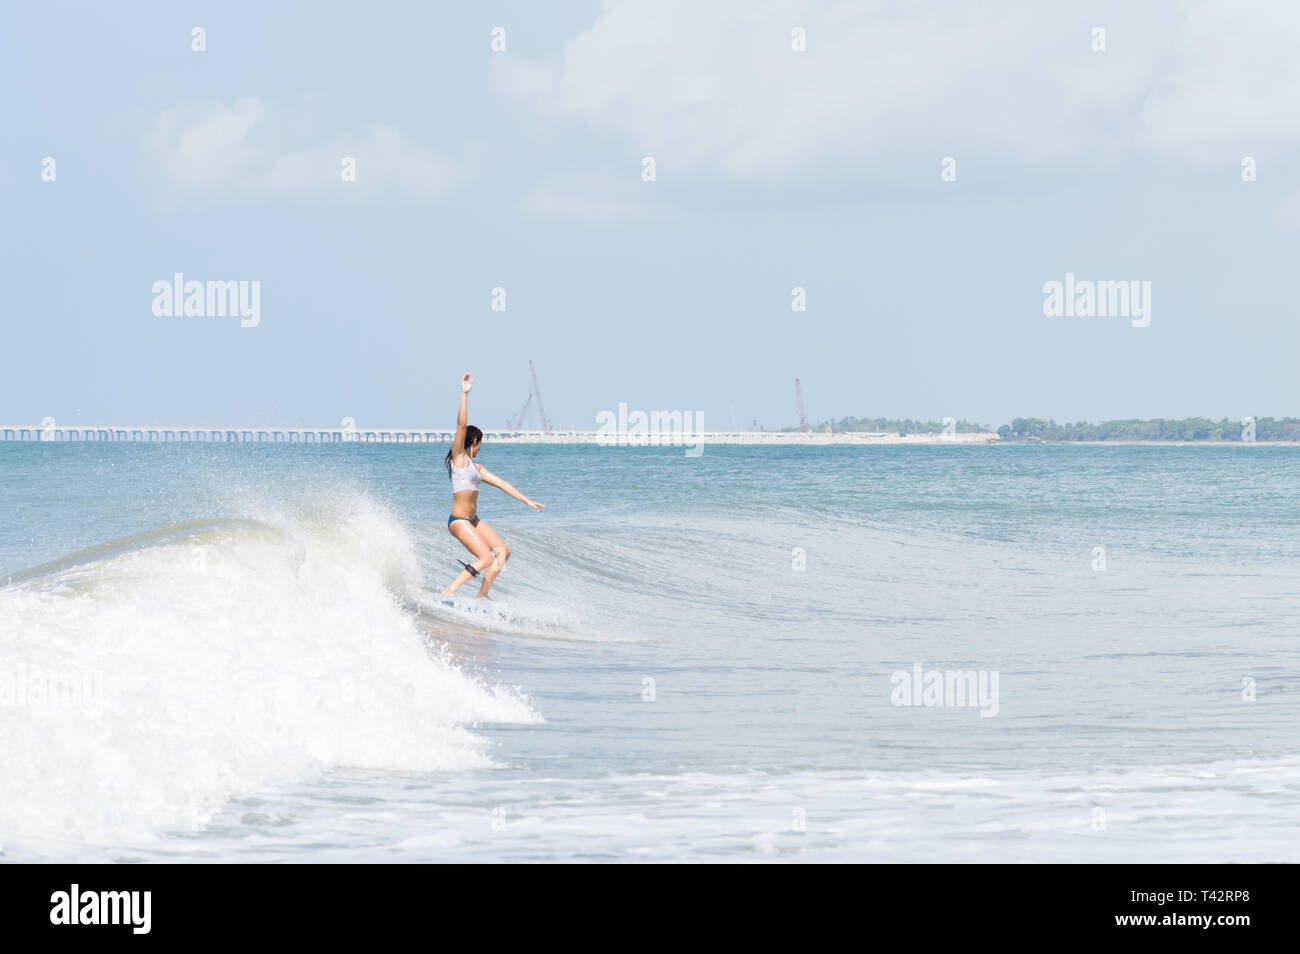 young adult woman enyoing a wave while surfing a longboard in the caribbean during a sunny day Stock Photo